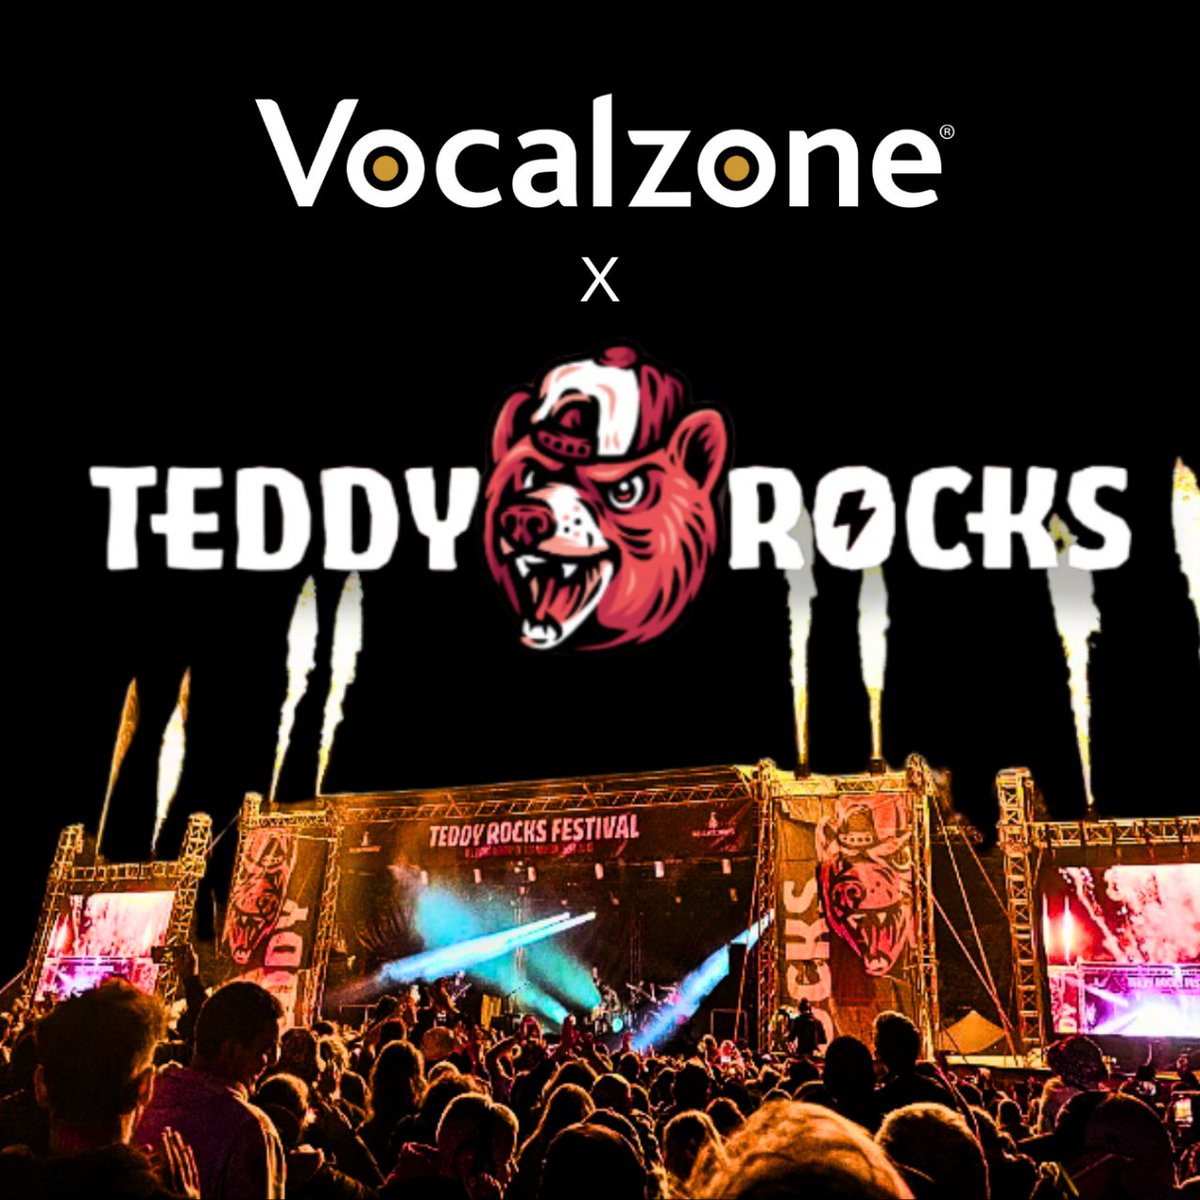 First day of Teddy Rocks Fest, see you there! 🤘🔥 @TeddyRocksFest  #teddyrocksfestival #vocalzone #vocalzonehq